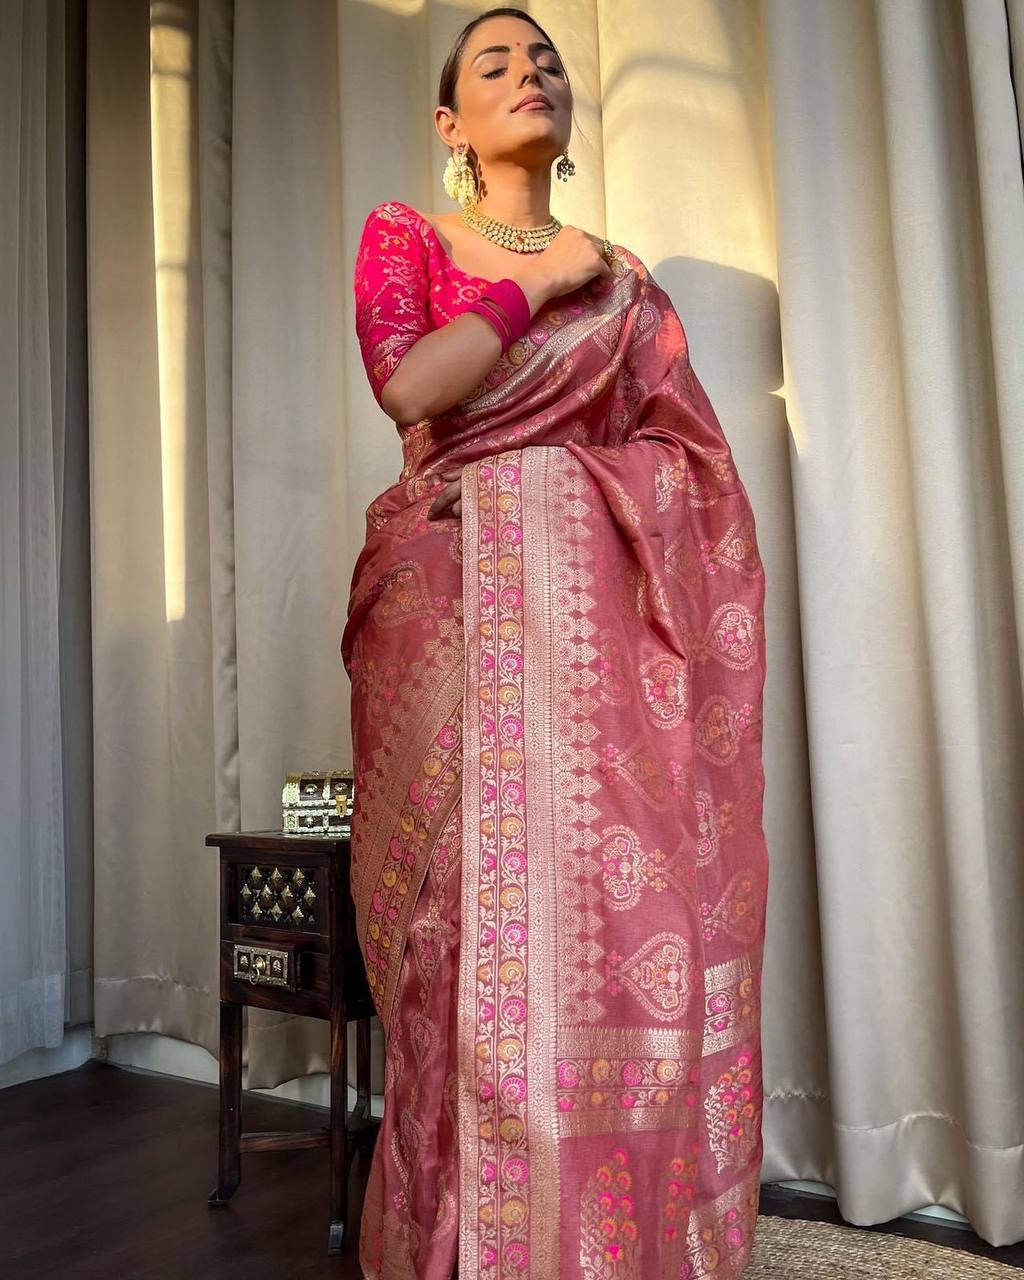 Orchid Pink Saree With Heavy Brocade Blouse